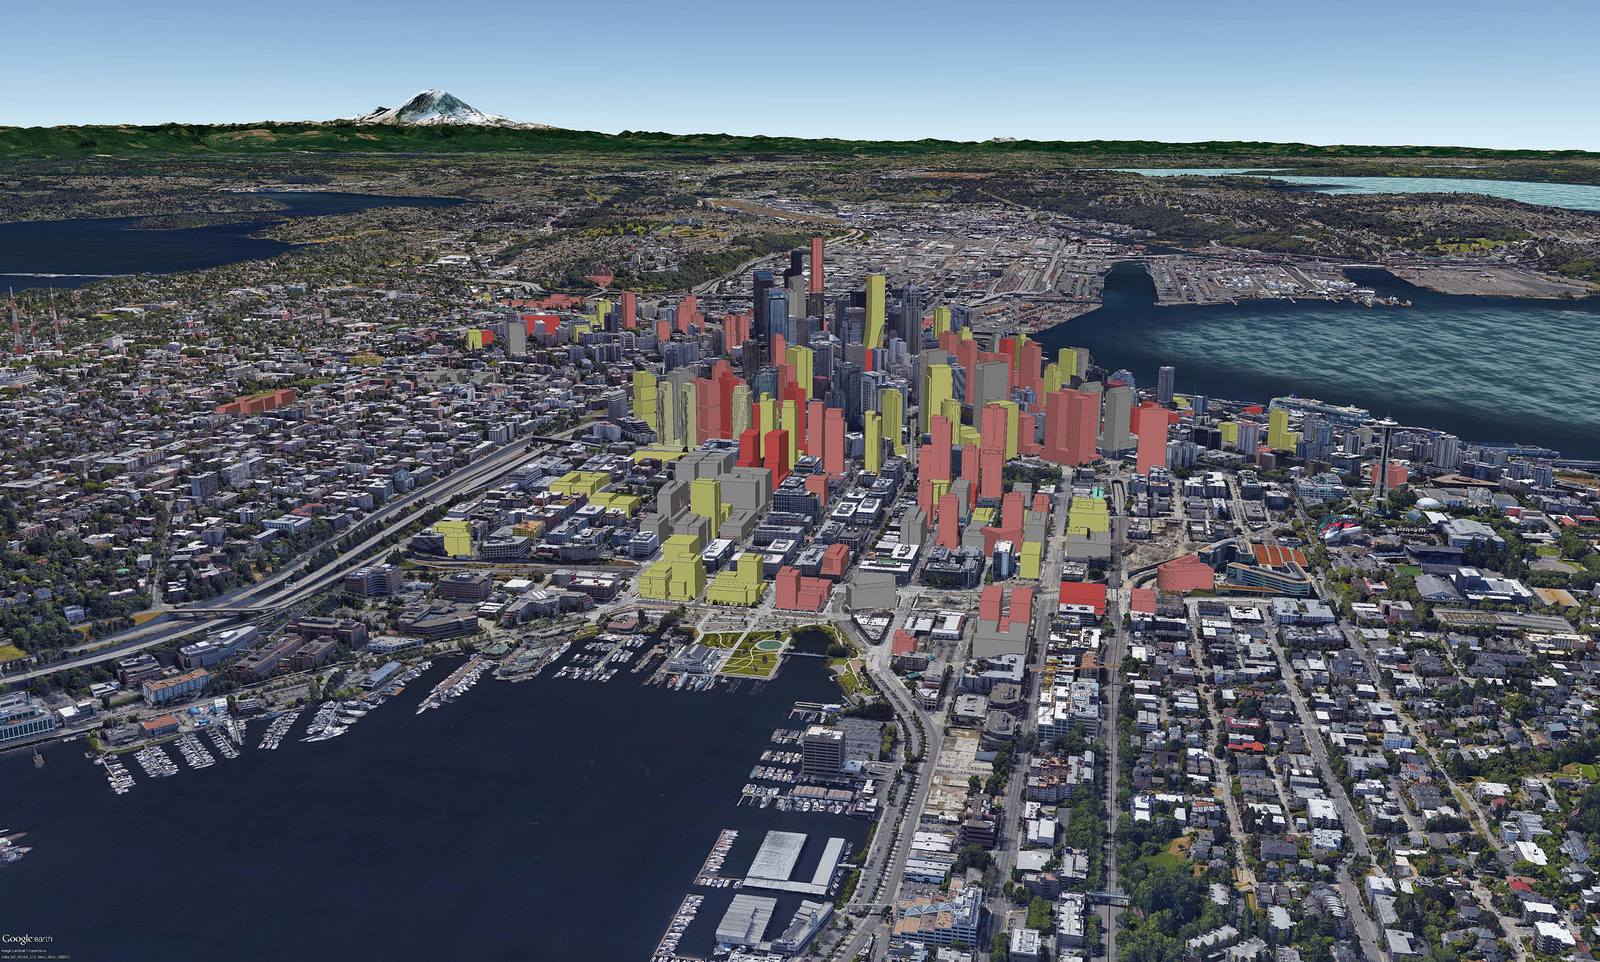 Rendering of South Lake Union with buildings currently under construction (yellow profiles), planned (salmon profiles), rumored (red profiles), and completed (grey profiles). (David Boynton)